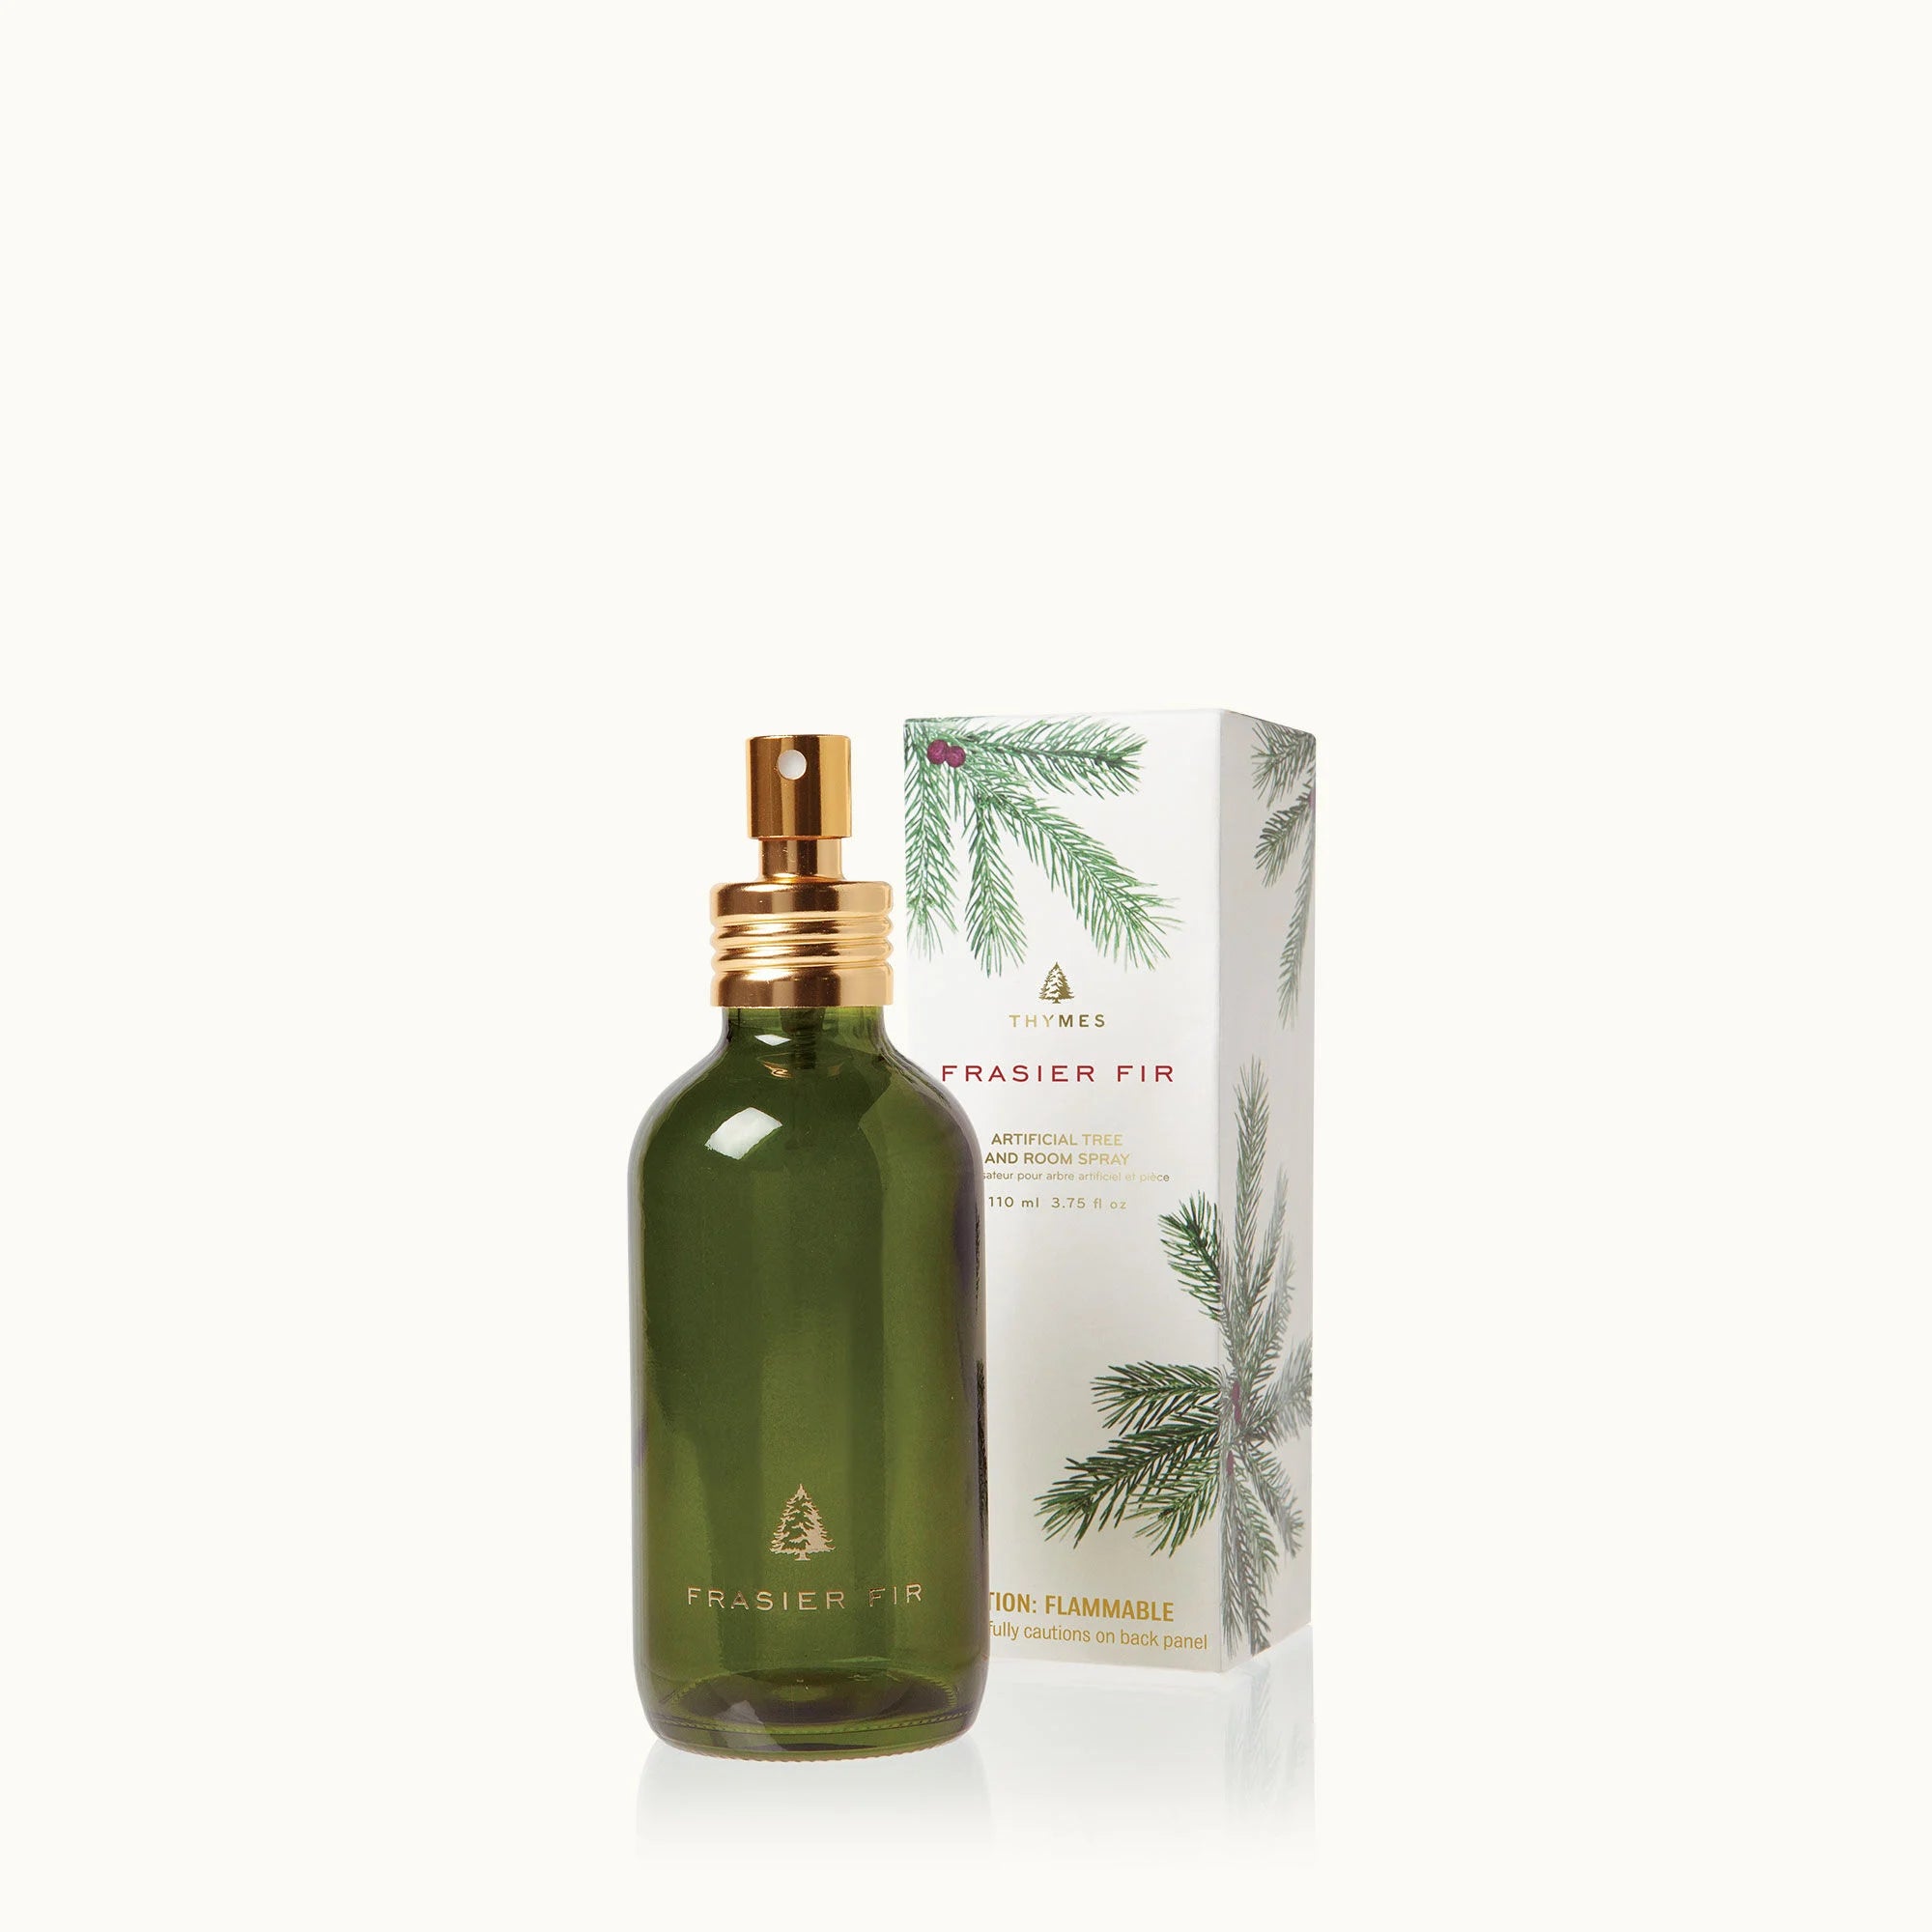 FRASIER FIR TREE AND ROOM SPRAY by THYMES